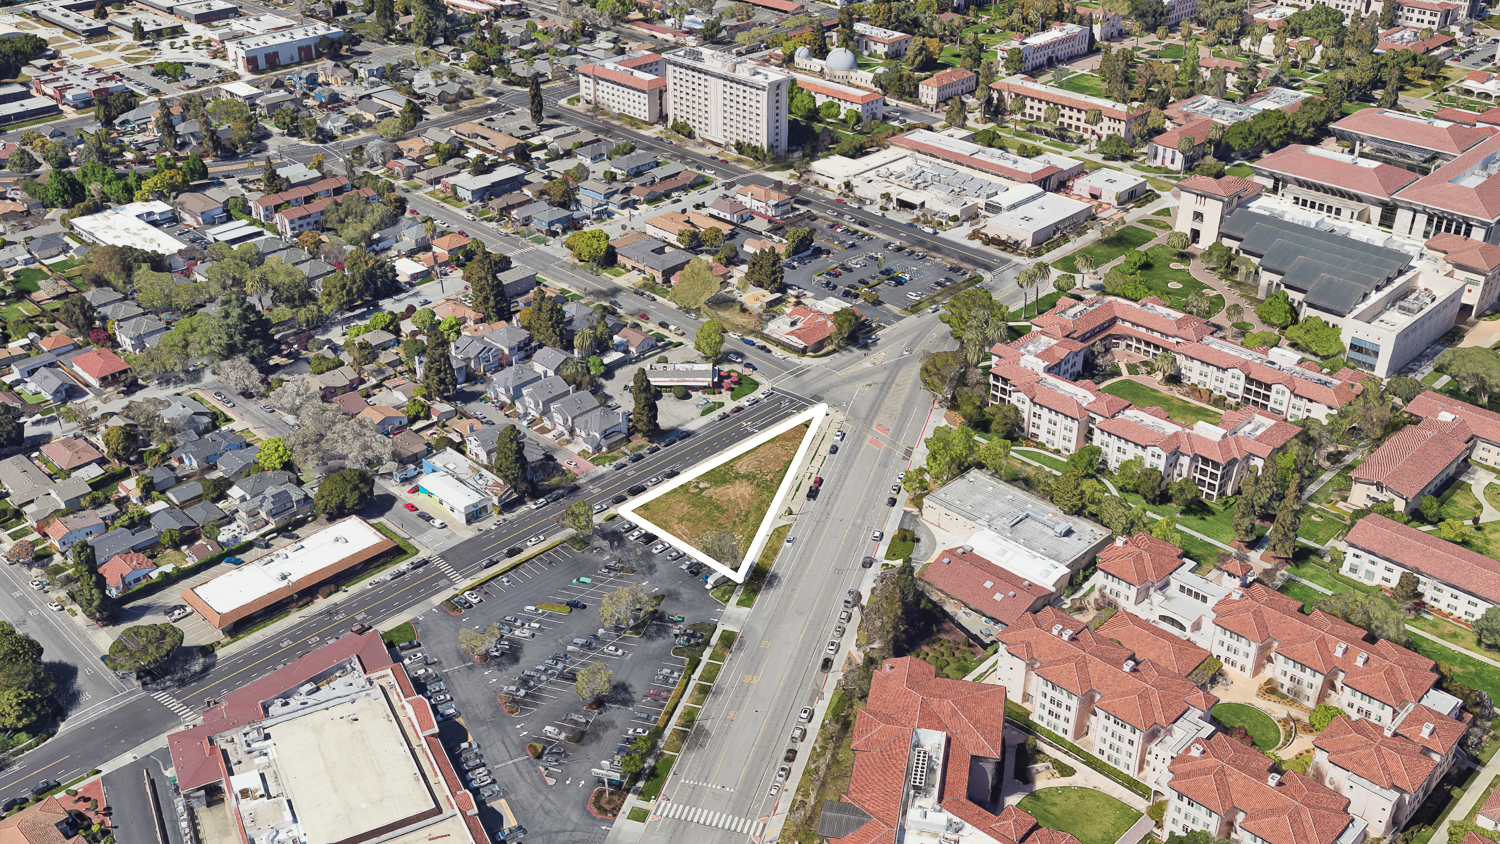 2655 The Alameda, image via Google Satellite outlined by YIMBY